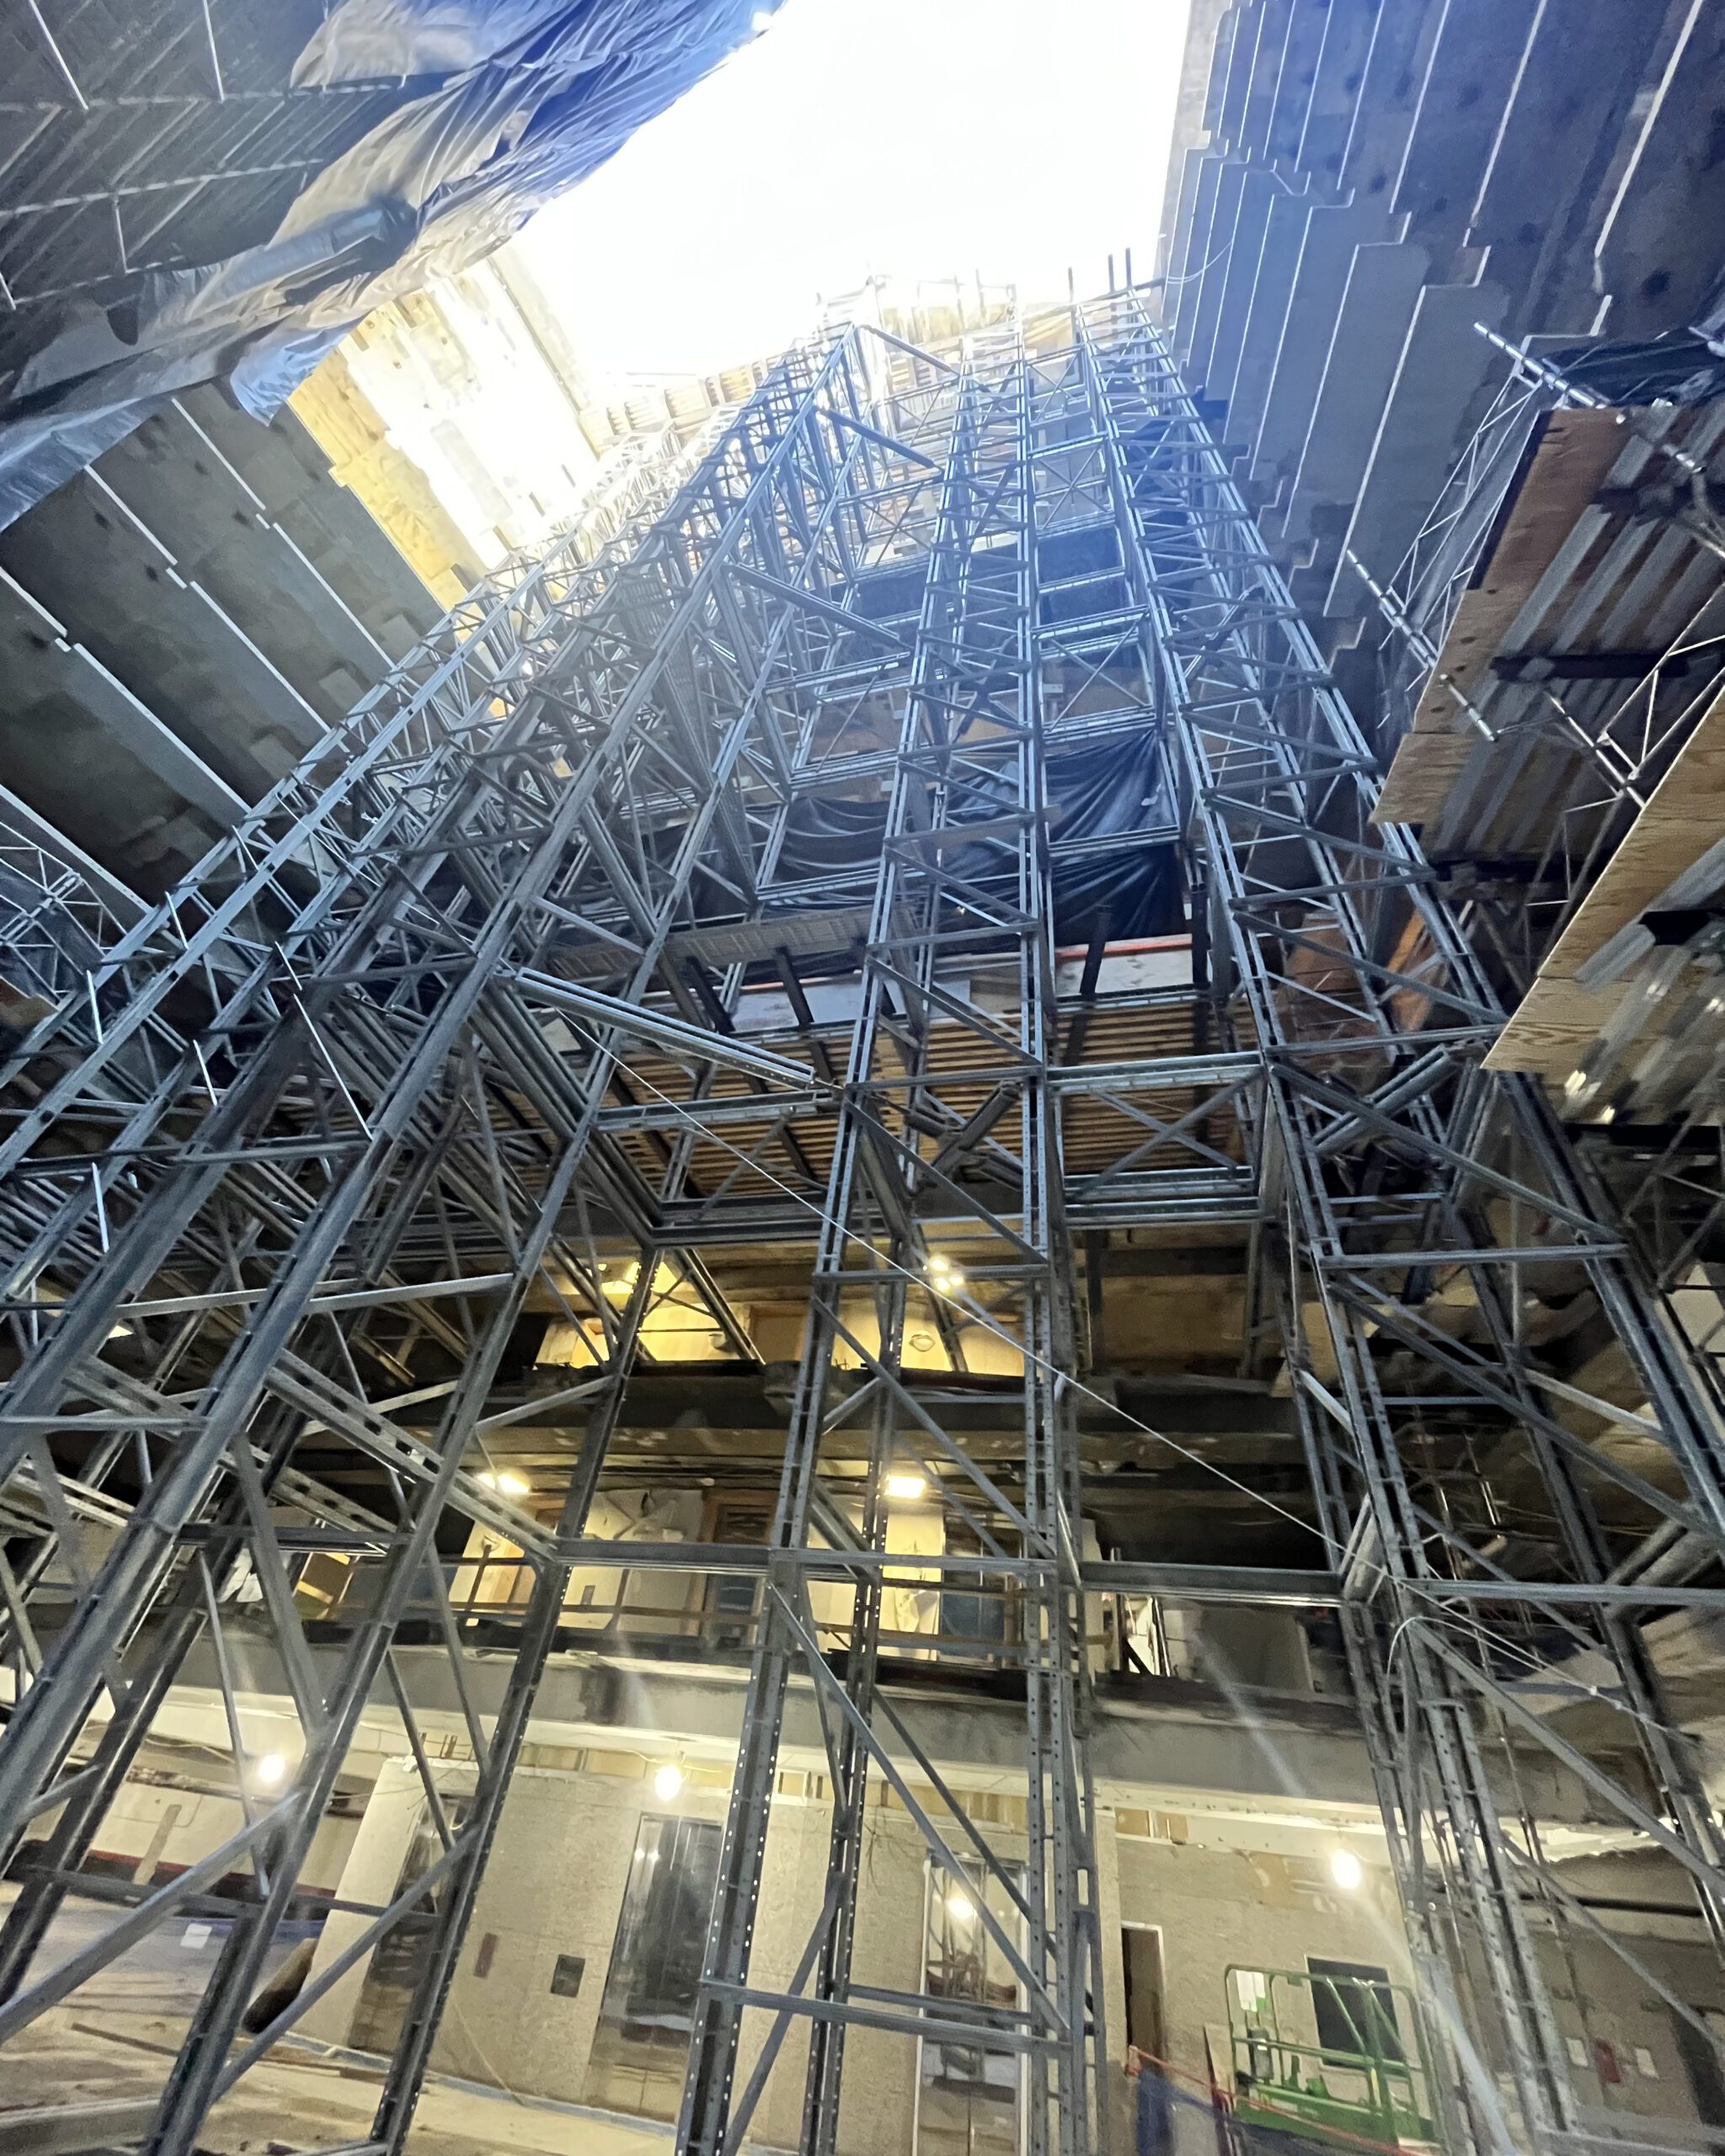 Shoring and bracing in the atrium during demolition